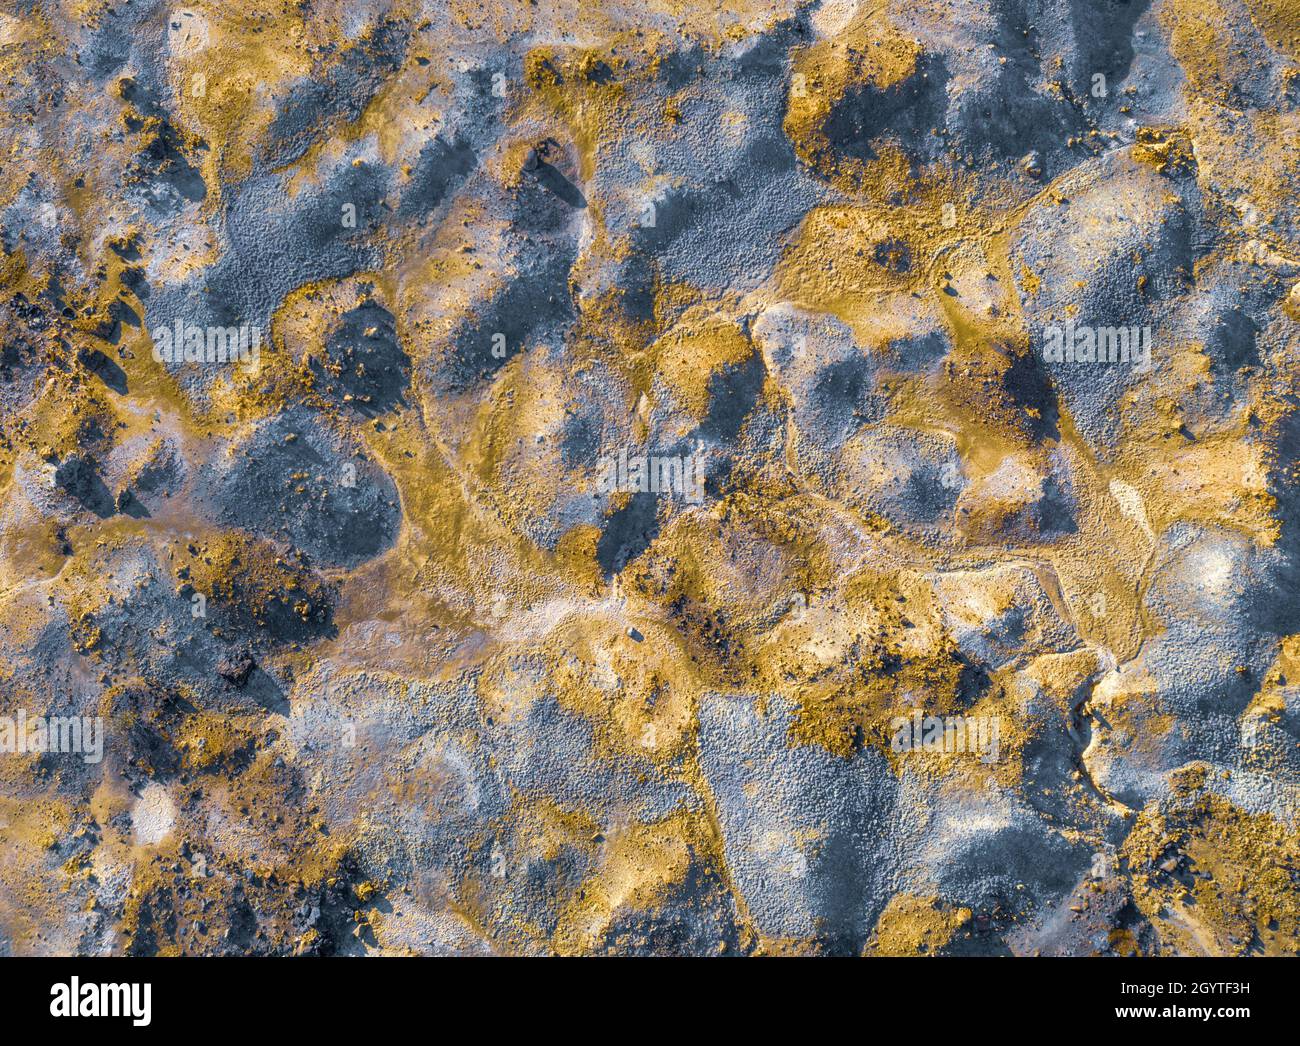 Contaminated surface of spoil heaps from mining at abandoned pyrite mine. Colorful texture, aerial view directly above Stock Photo